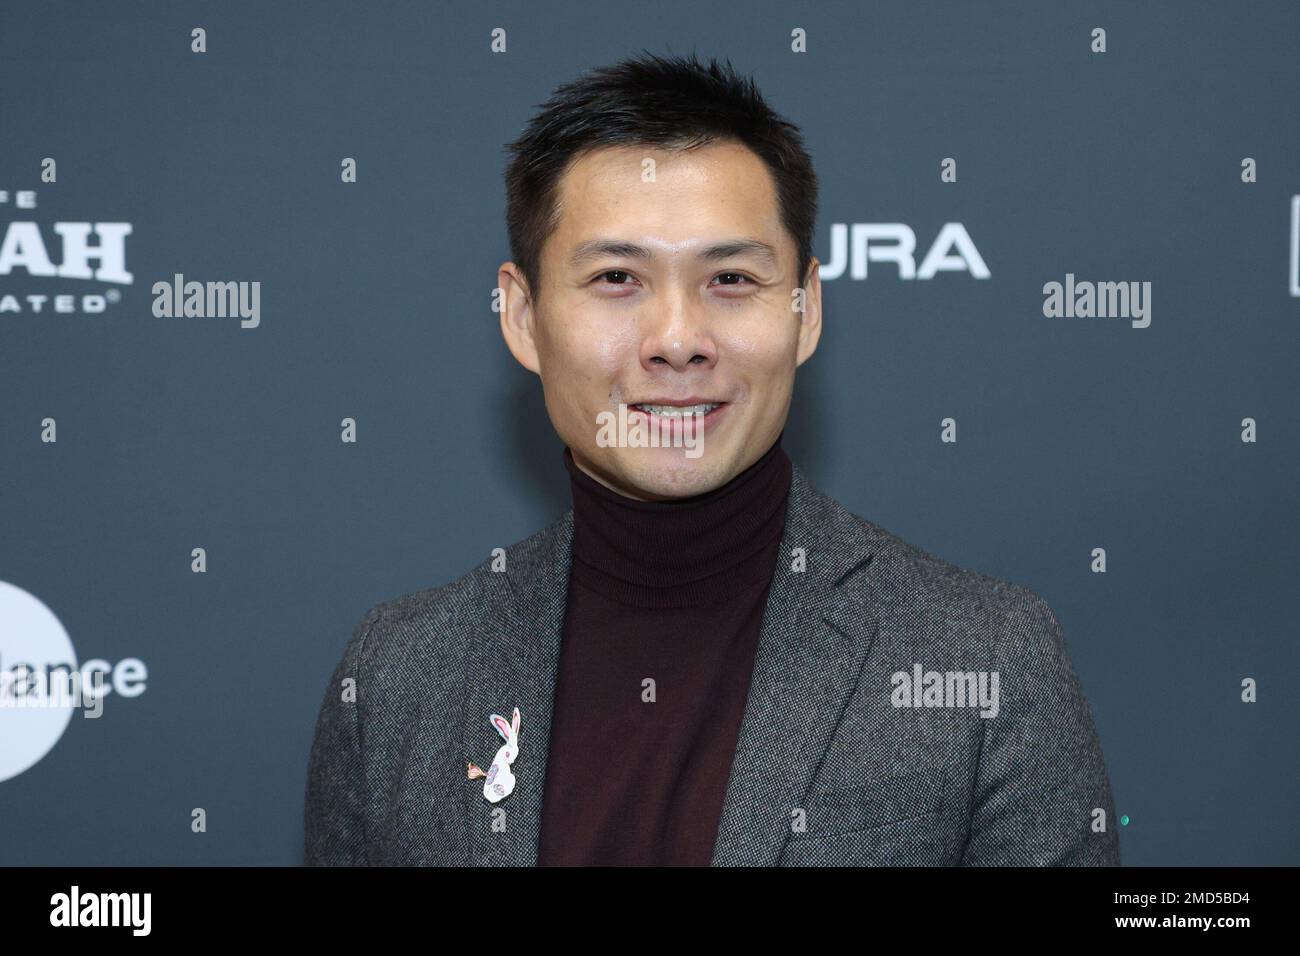 Park City, UT, USA. 22nd Jan, 2023. Anthony Chen (Director) at arrivals for DRIFT Premiere at Sundance Film Festival 2023, Eccles Theater, Park City, UT January 22, 2023. Credit: JA/Everett Collection/Alamy Live News Stock Photo